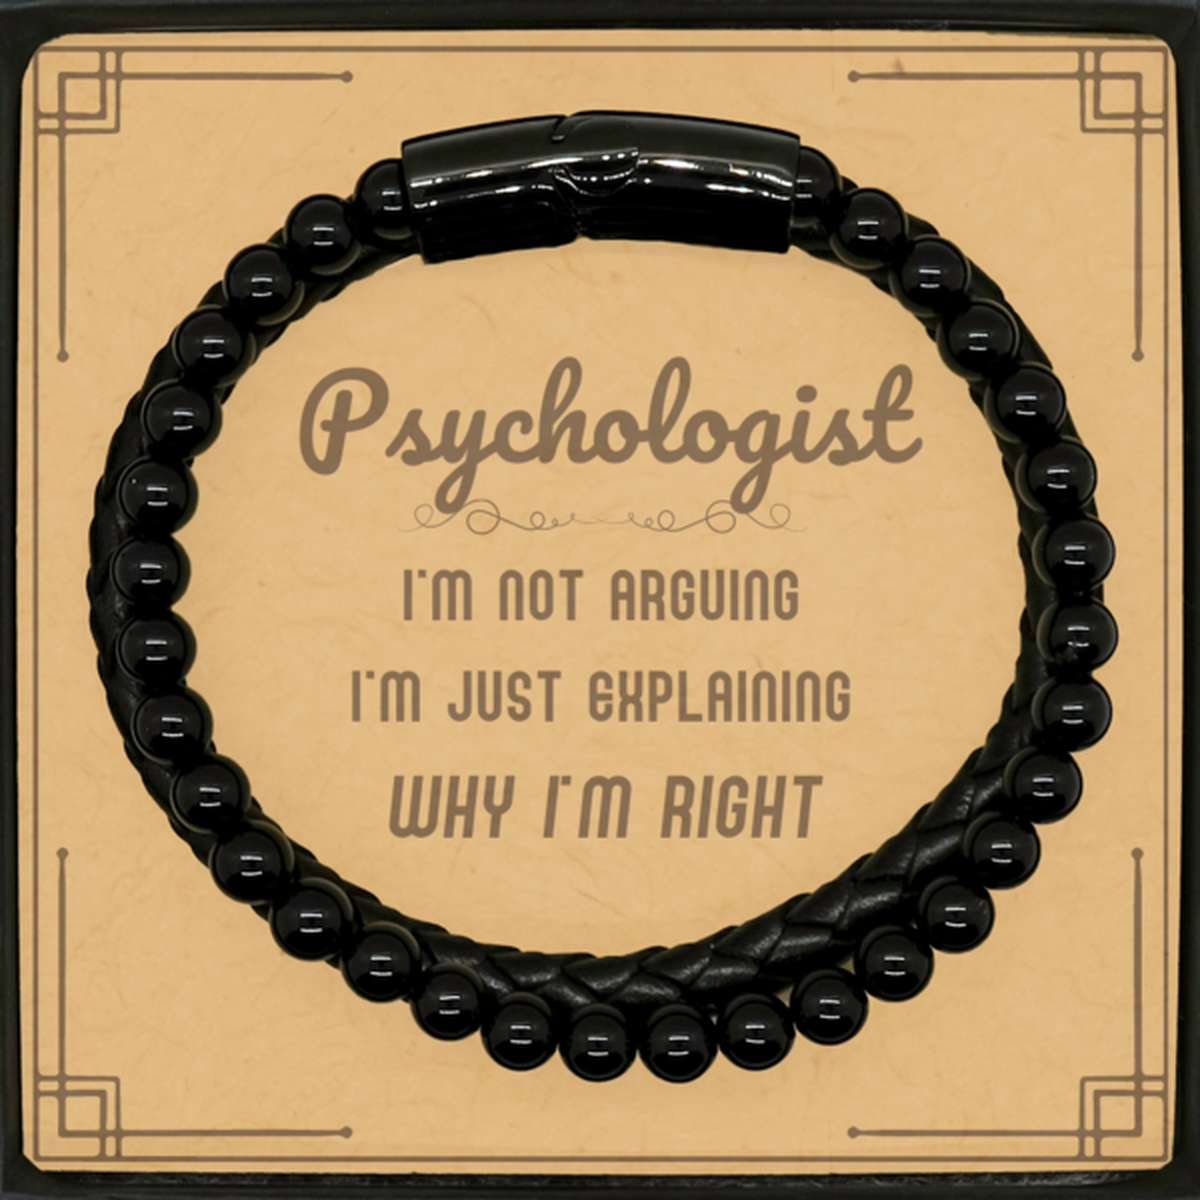 Psychologist I'm not Arguing. I'm Just Explaining Why I'm RIGHT Stone Leather Bracelets, Funny Saying Quote Psychologist Gifts For Psychologist Message Card Graduation Birthday Christmas Gifts for Men Women Coworker